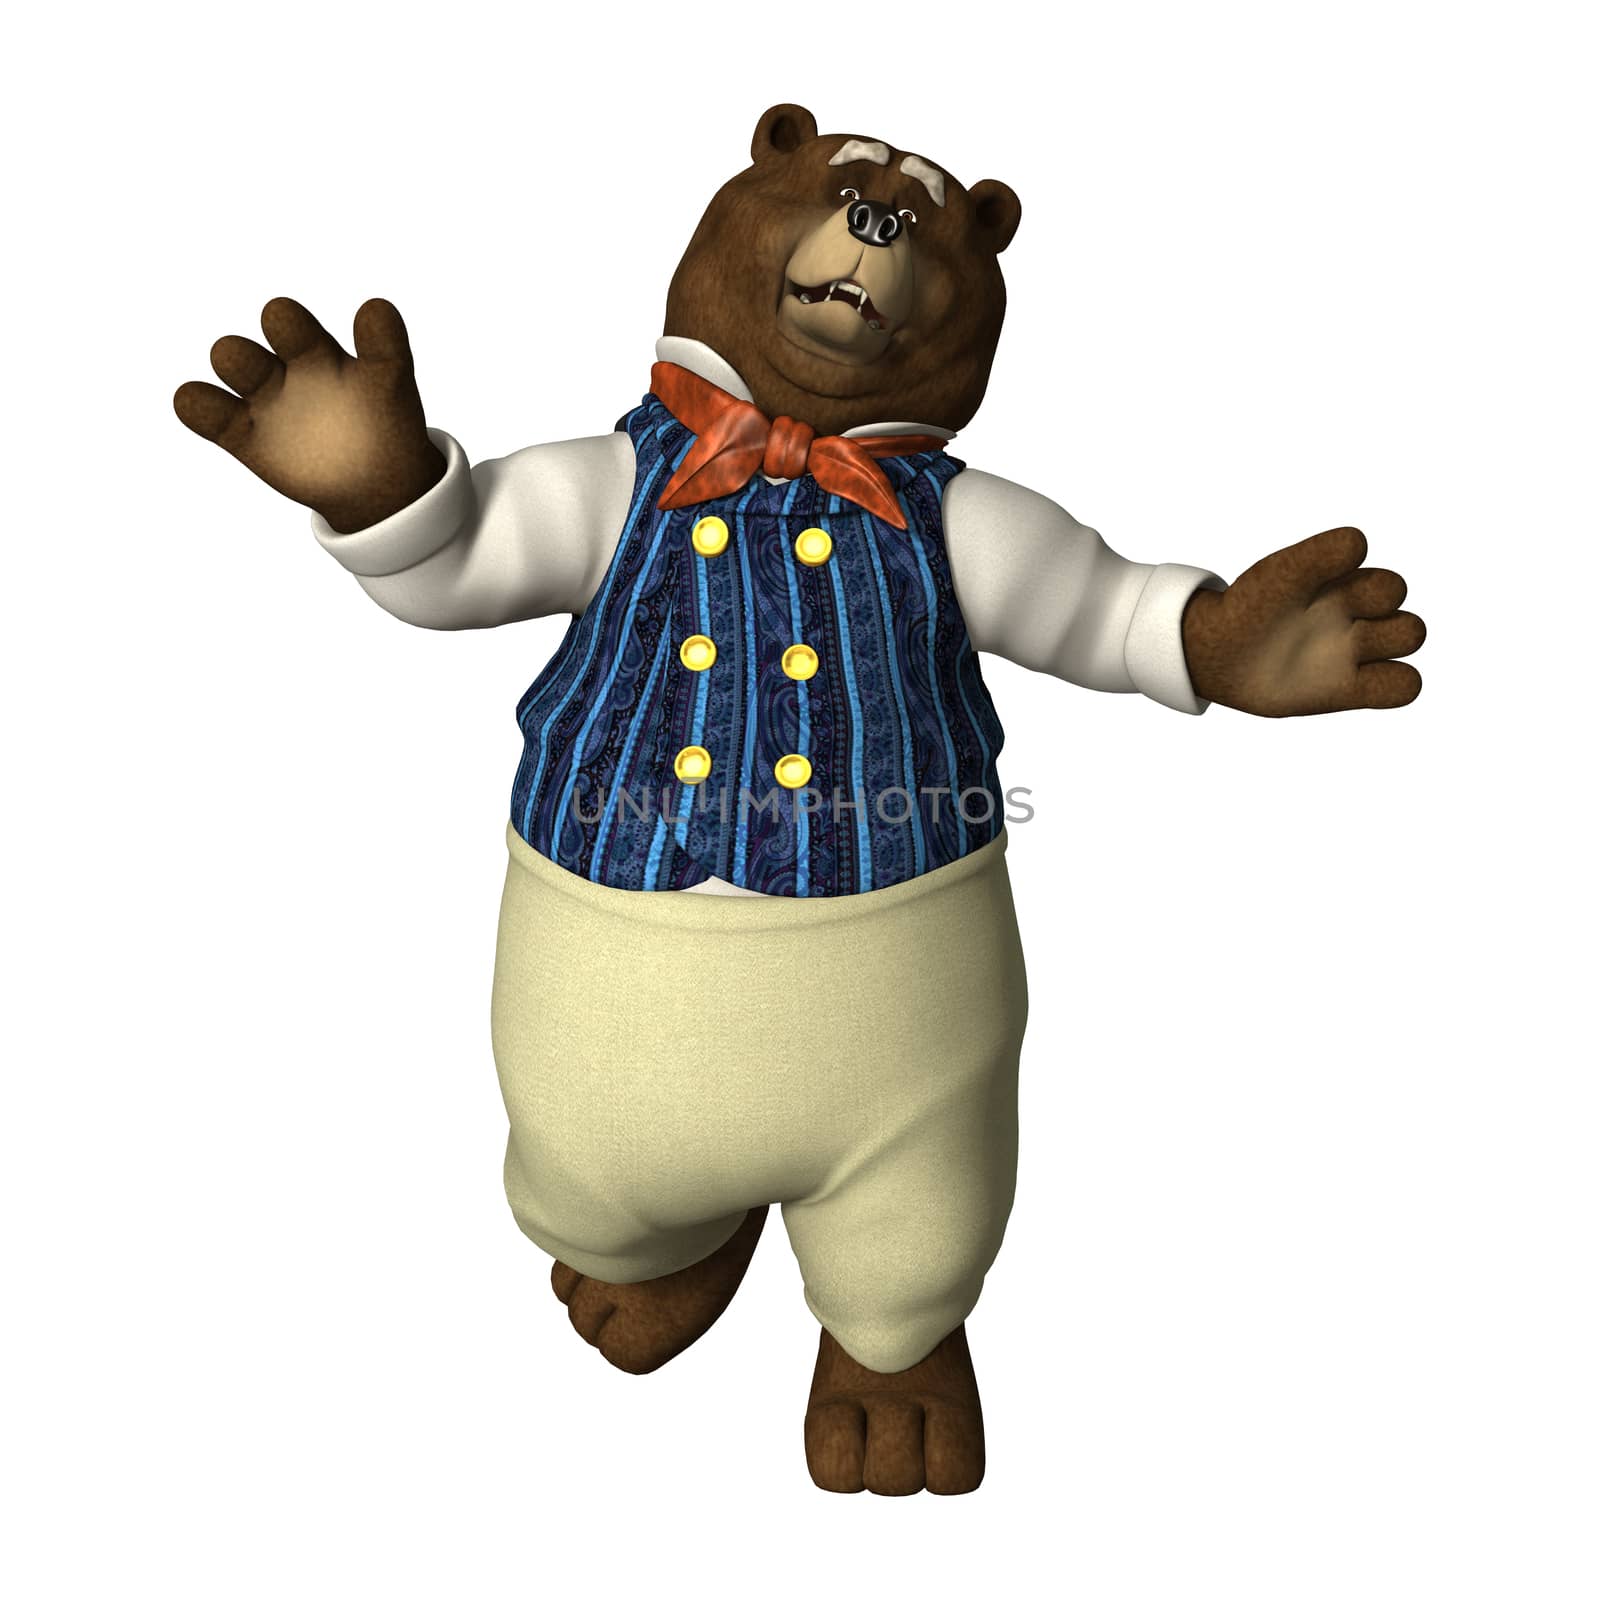 3D digital render of a fairytale bear running isolated on white background